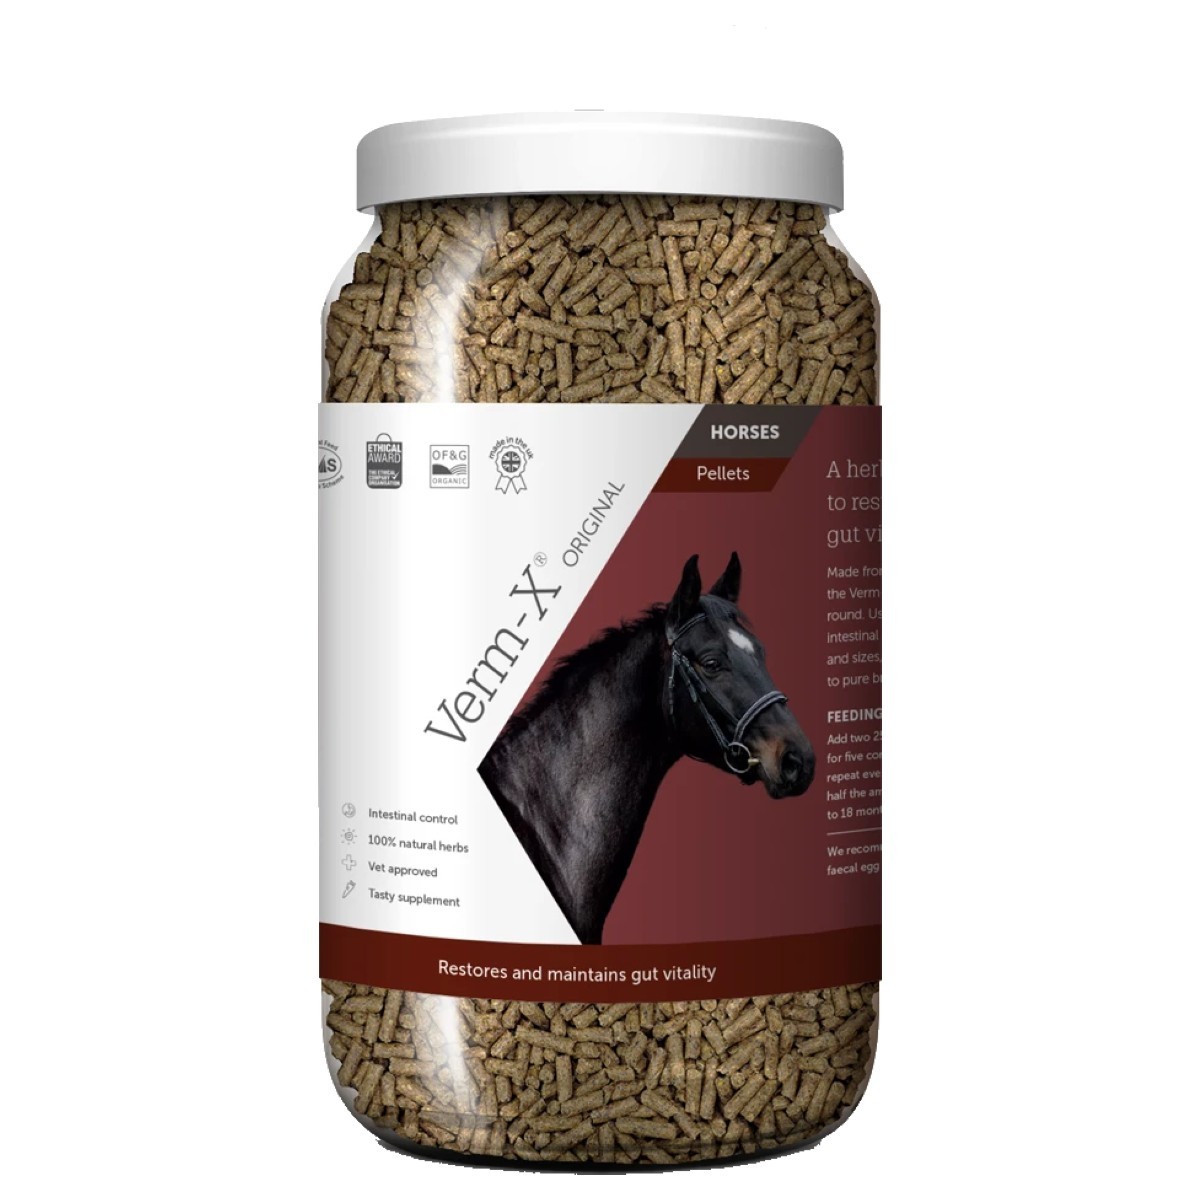 is dog food made out of horses